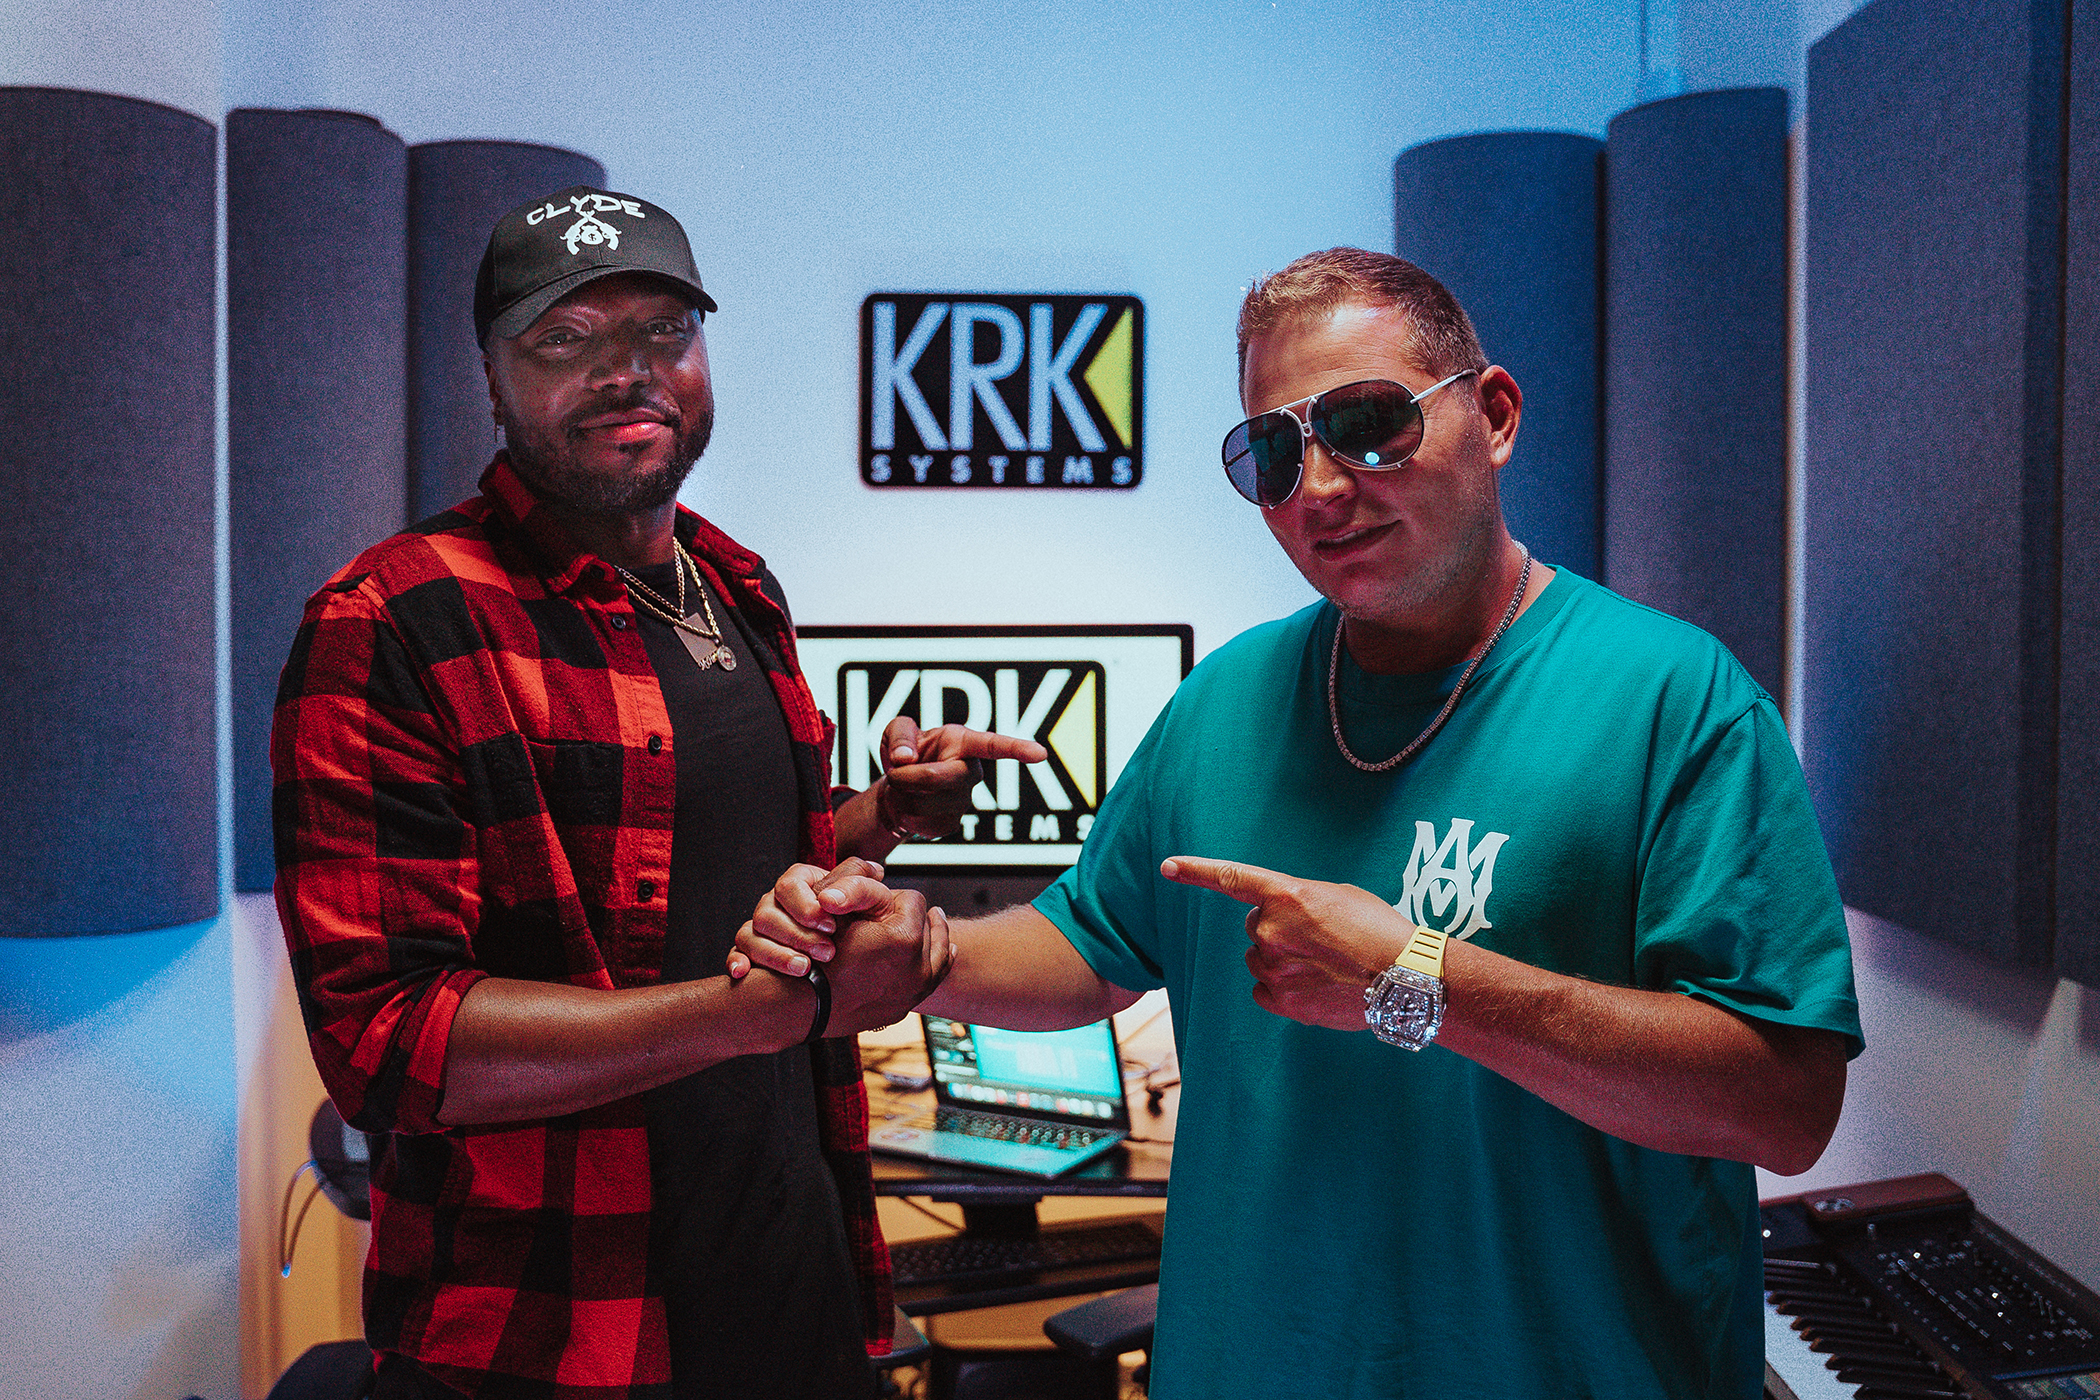 Clyde Strokes and Scott Storch at KRK Kreativity Bootcamp